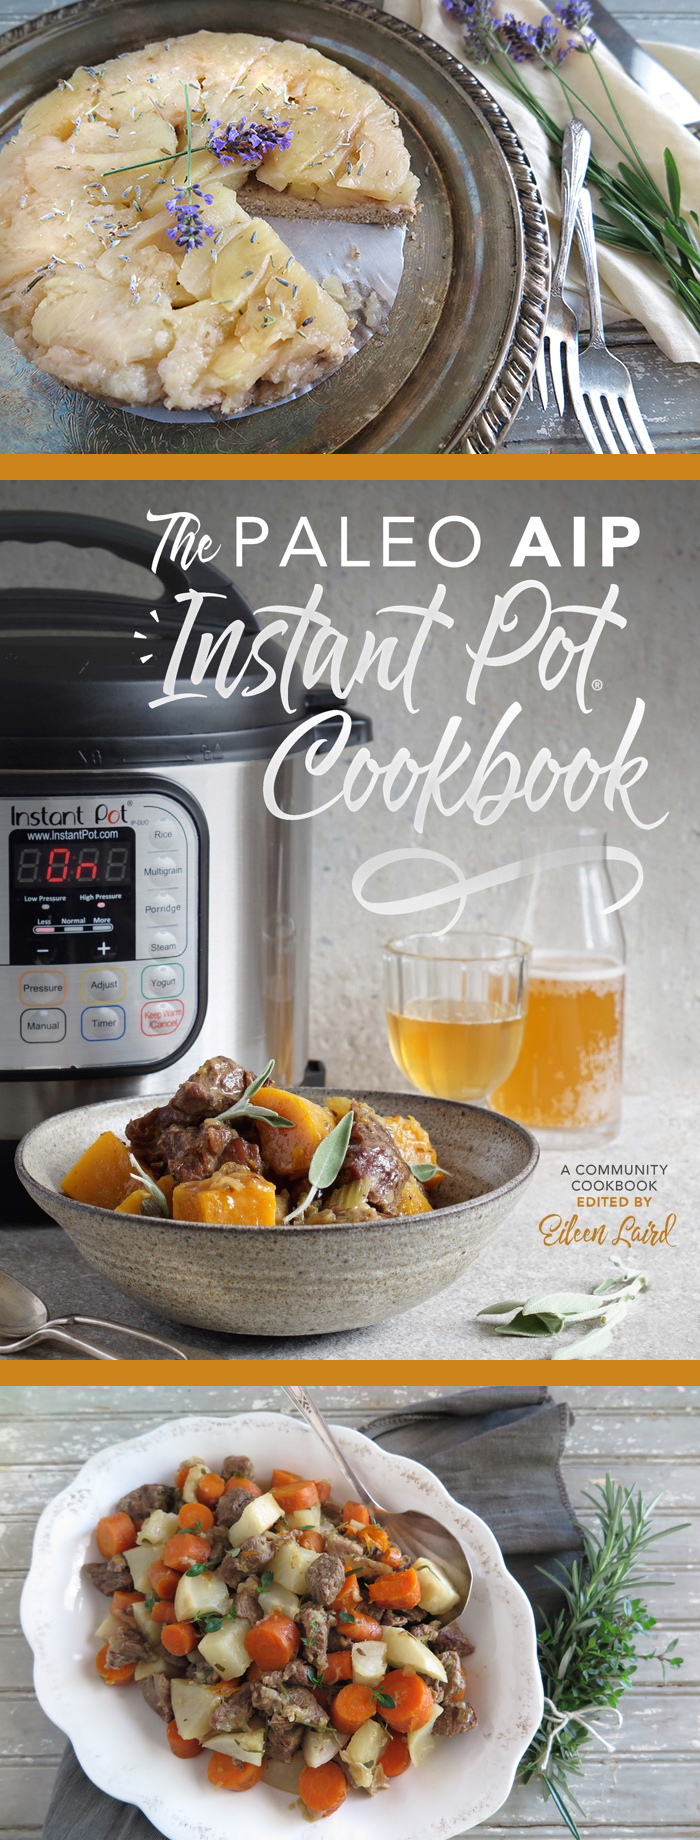 The Paleo AIP Instant Pot Cookbook Review